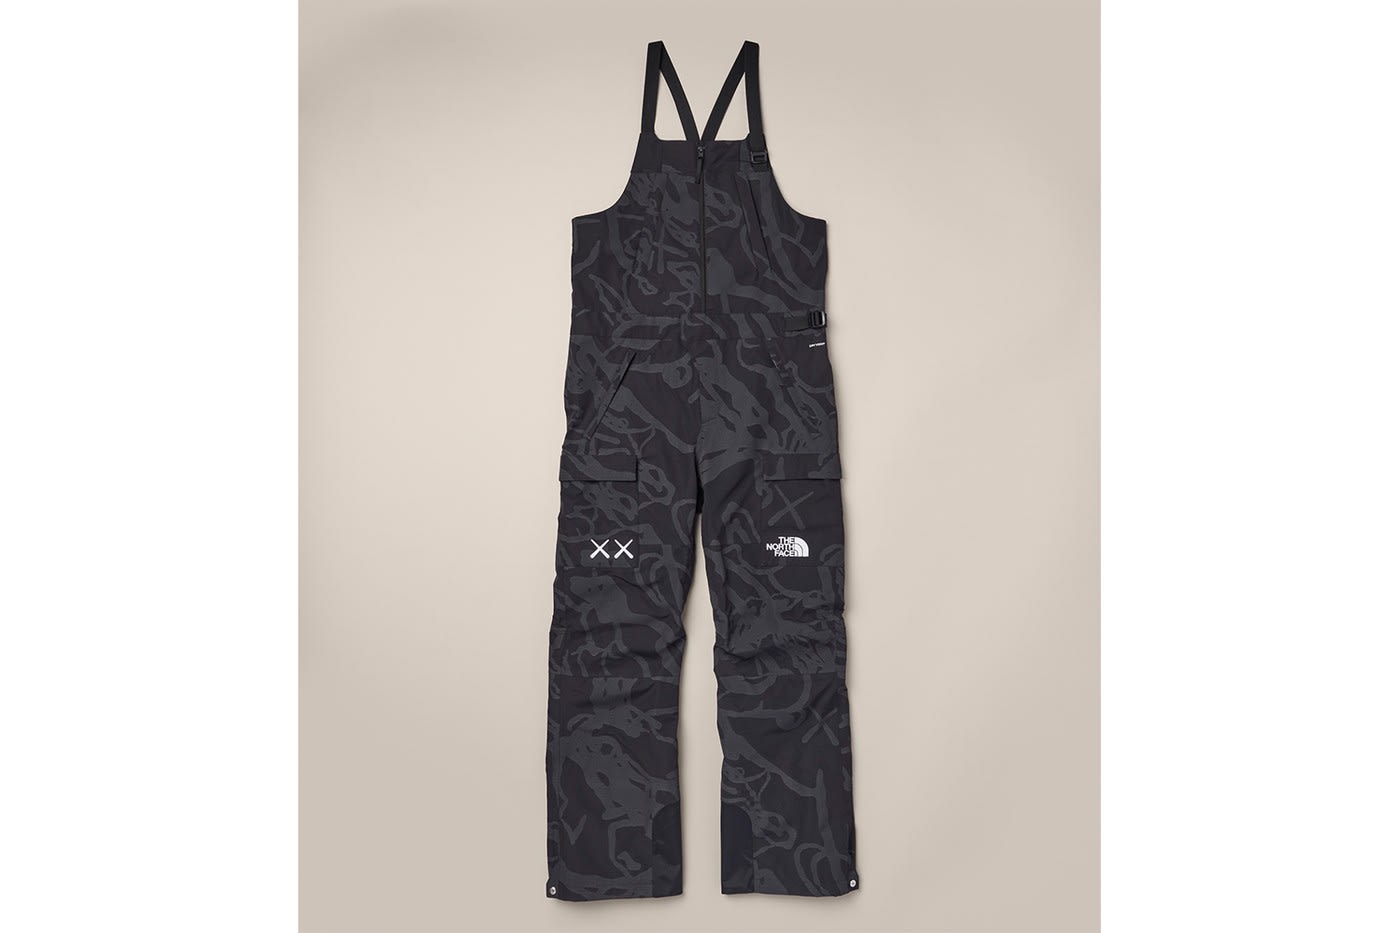 Kaws x The North Face overalls